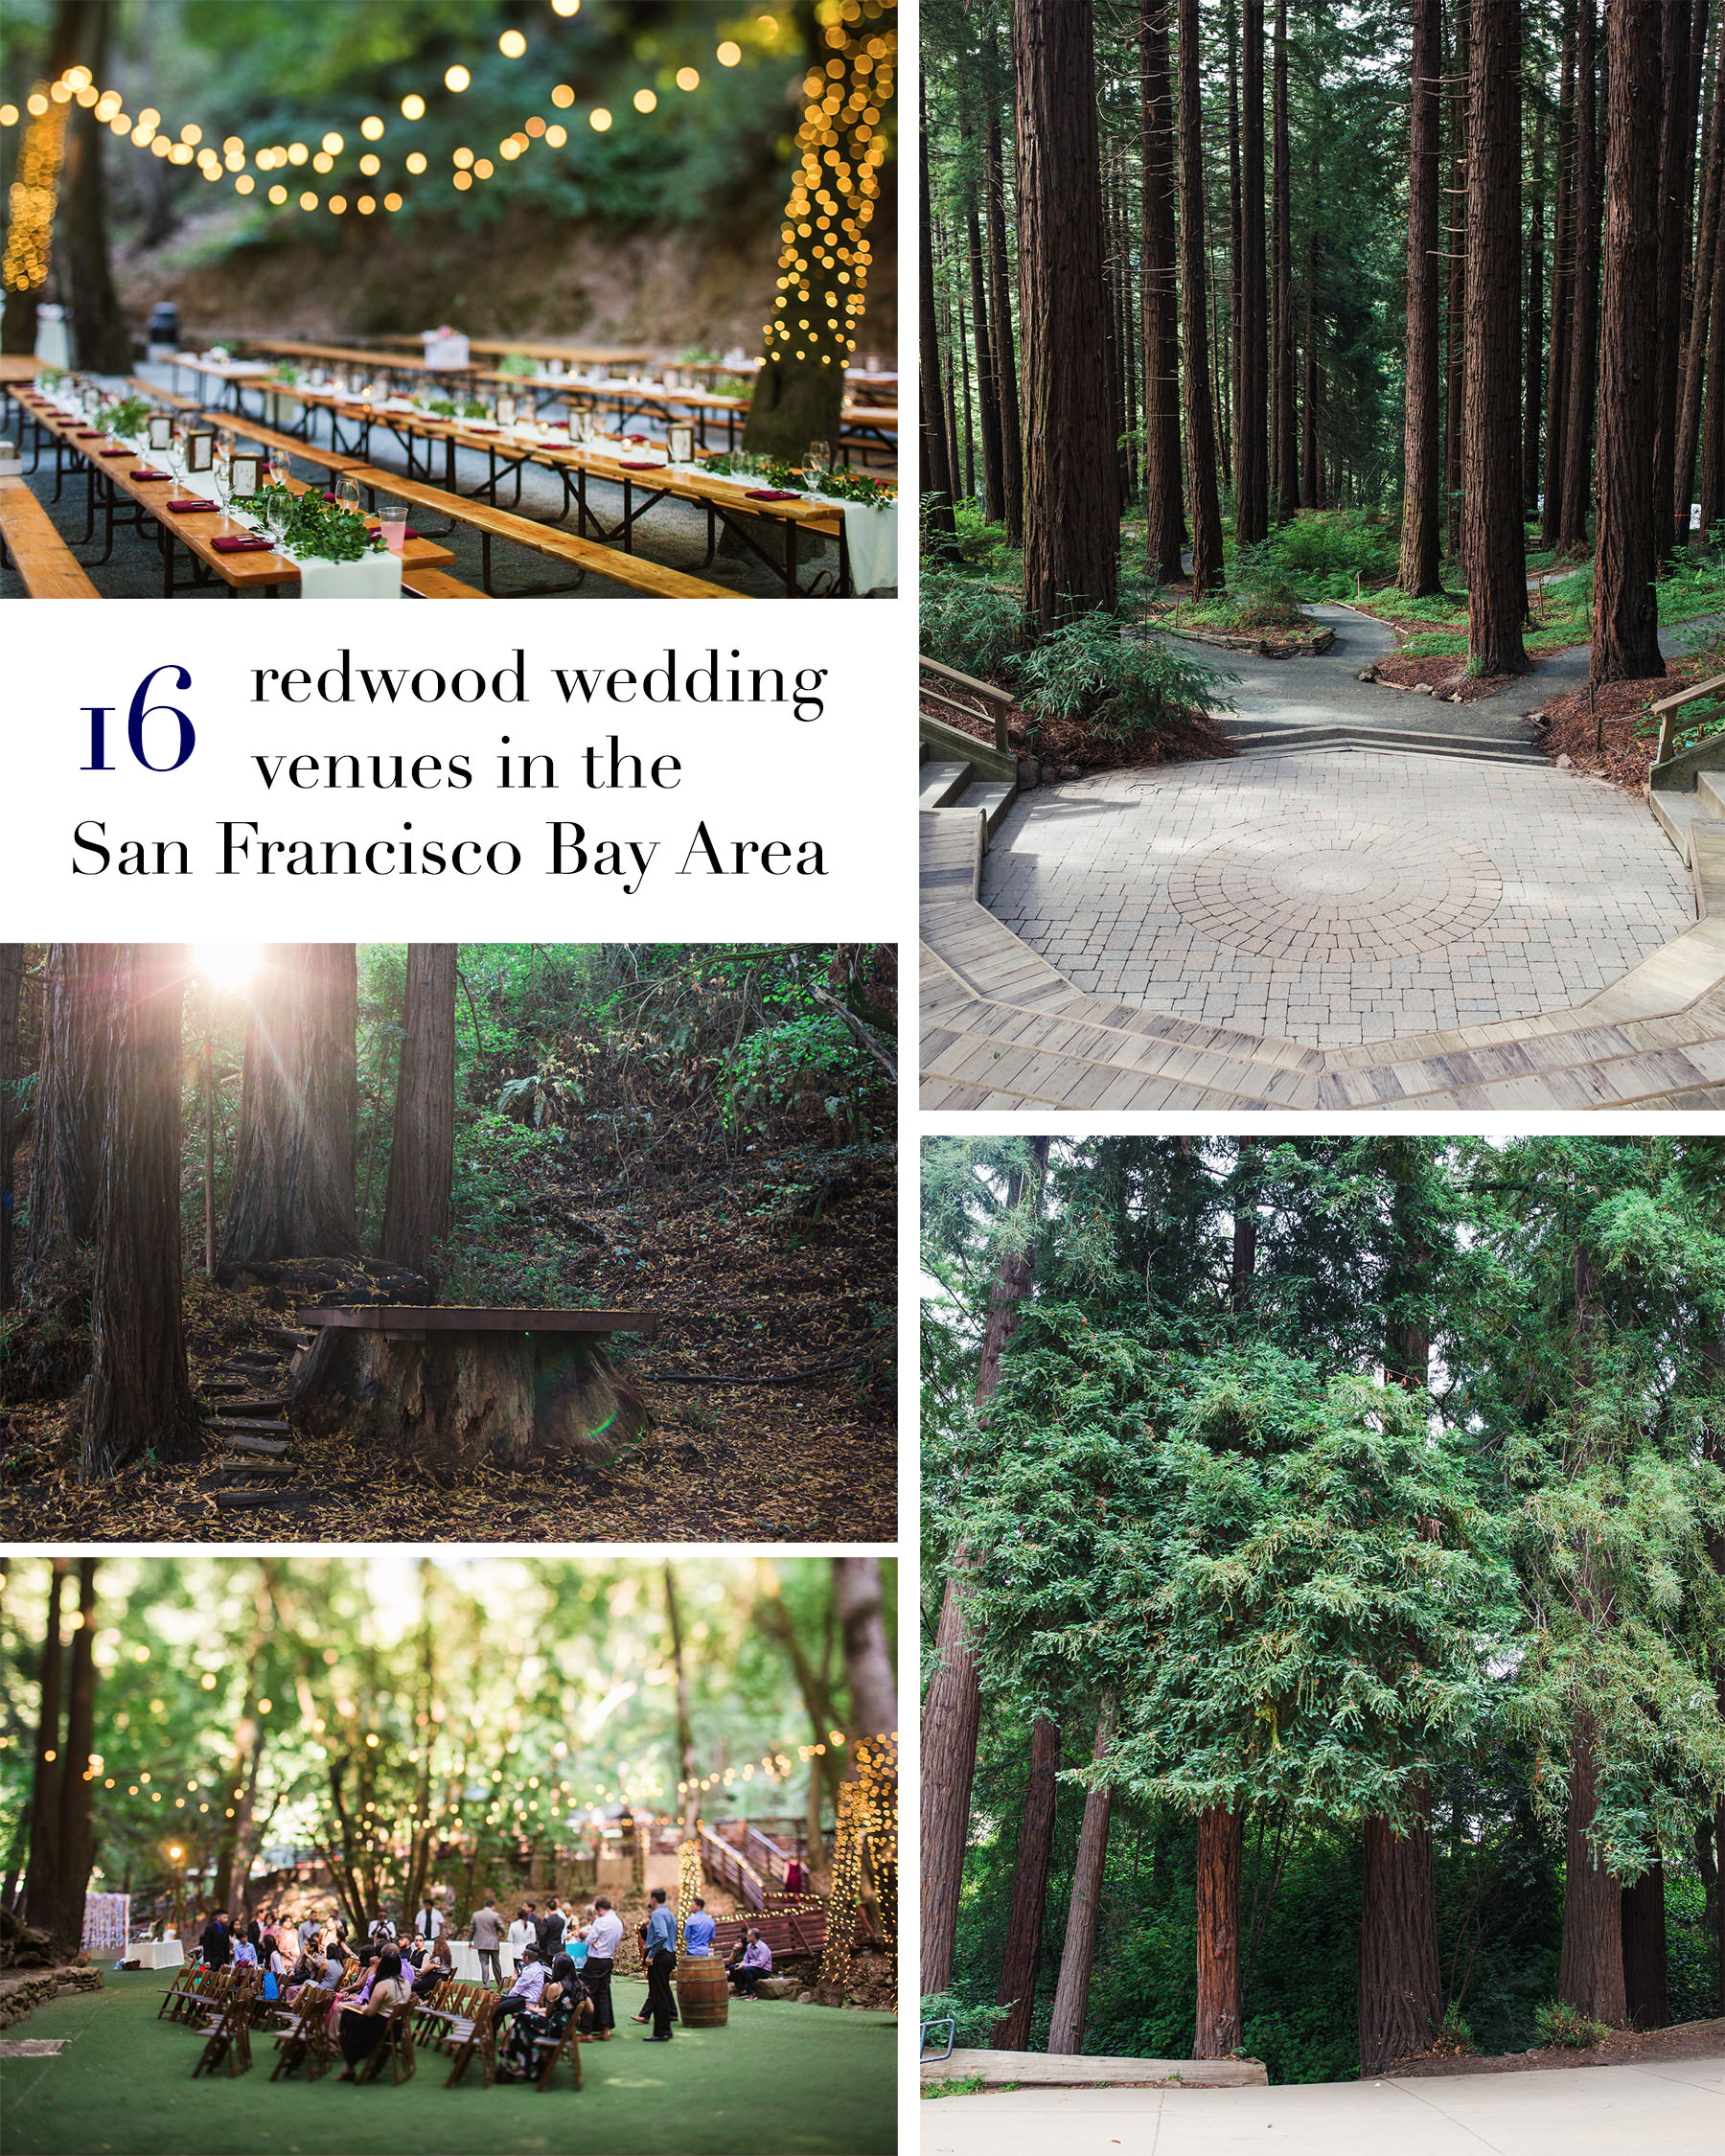 16 wedding venues with redwoods in the San Francisco Bay Area